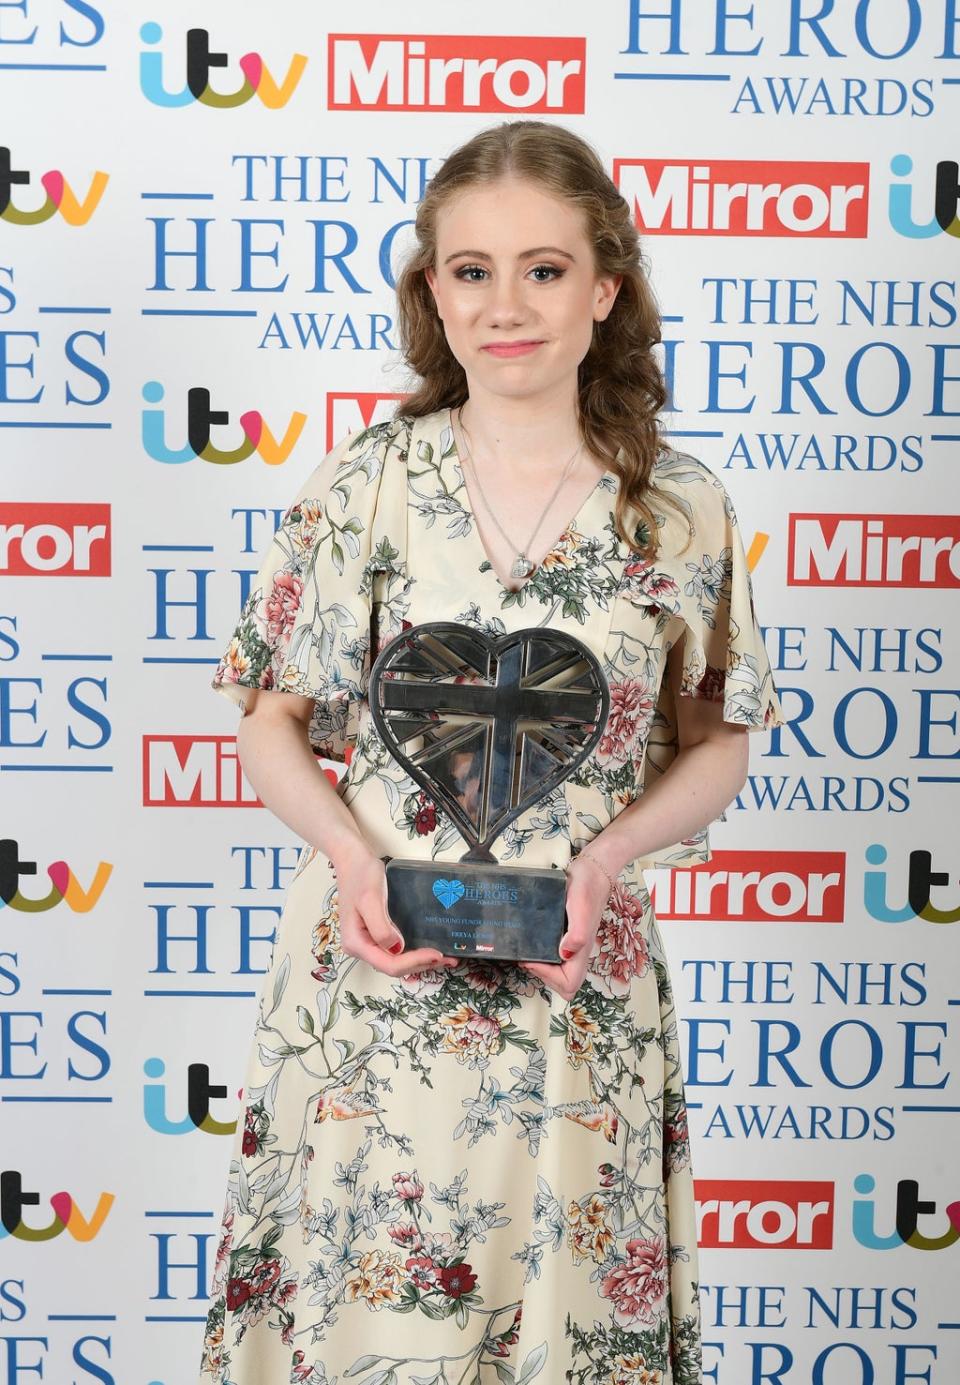 Freya Lewis was recognised with the 2018 Young Fundraiser Award at the NHS Heroes Awards at the Hilton Hotel in London (Ian West/PA) (PA Archive)